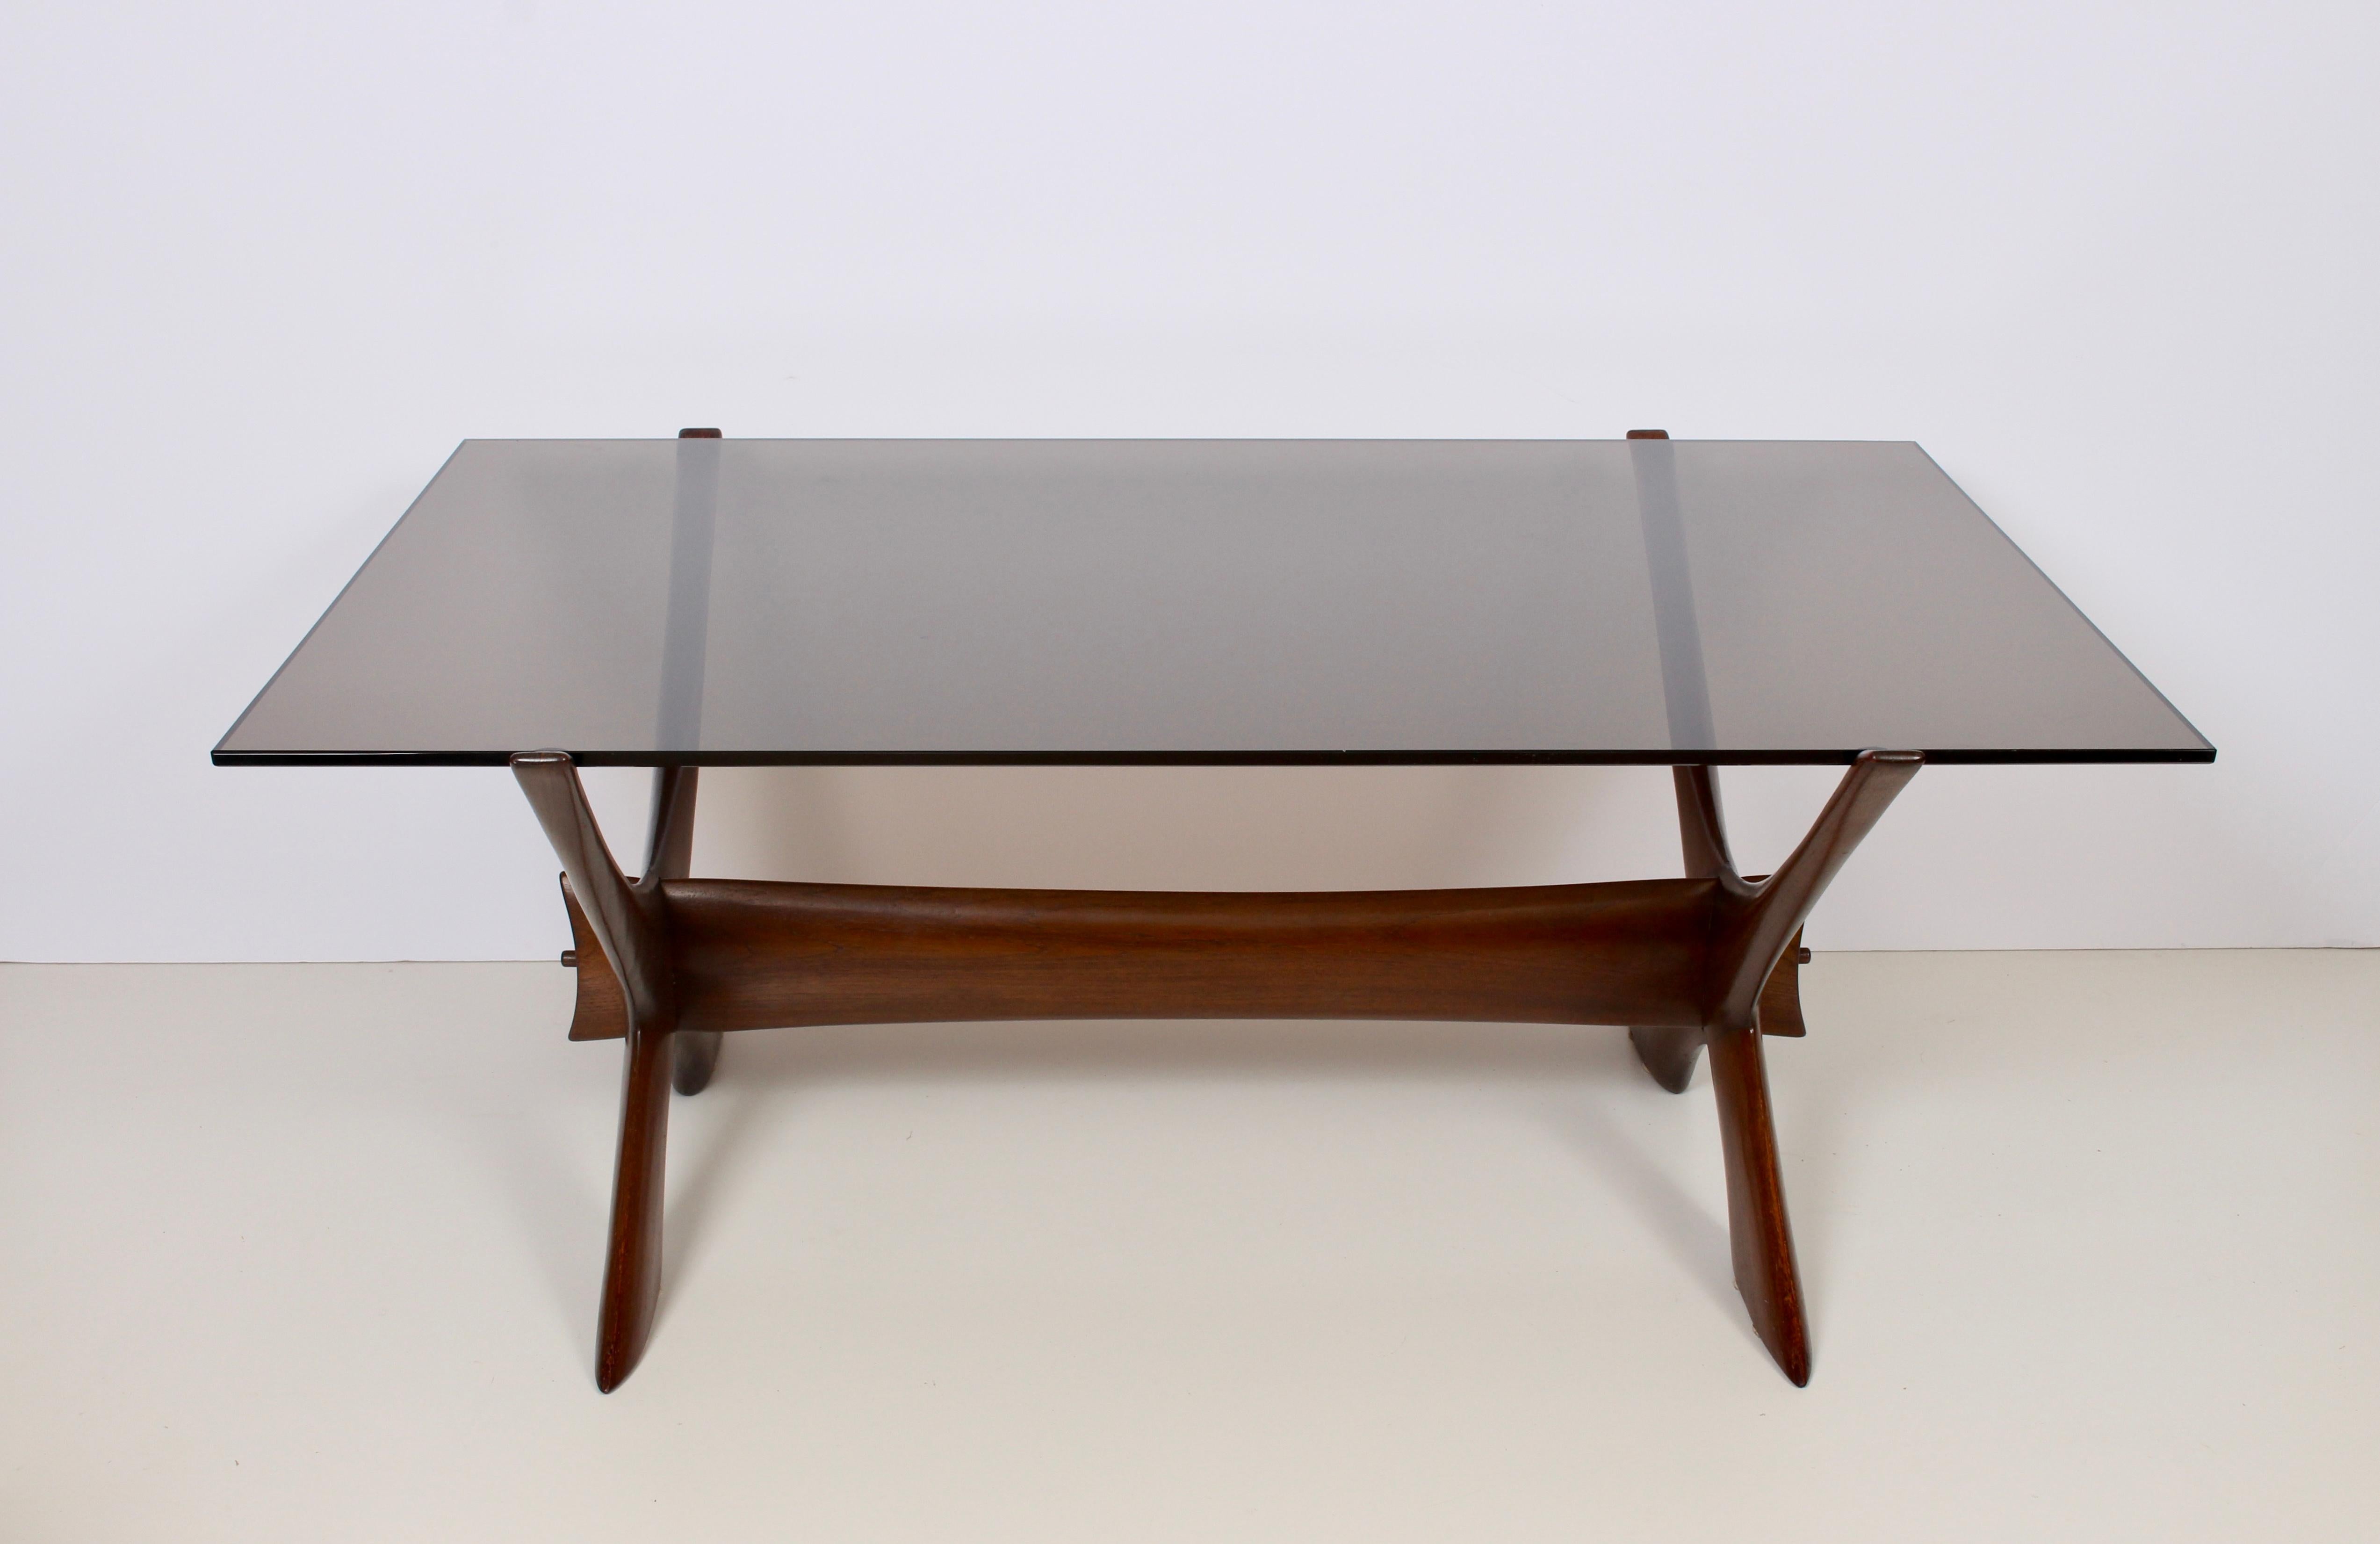 Danish Modern Illum Wikkelso for C. F. Christensen teak coffee table with smoked gray glass surface. Featuring a smooth, braced and sturdy rectangular, dark teak x framework with (34D x 53W) smoky grey glass surface. Timeless. Sculptural. Fine